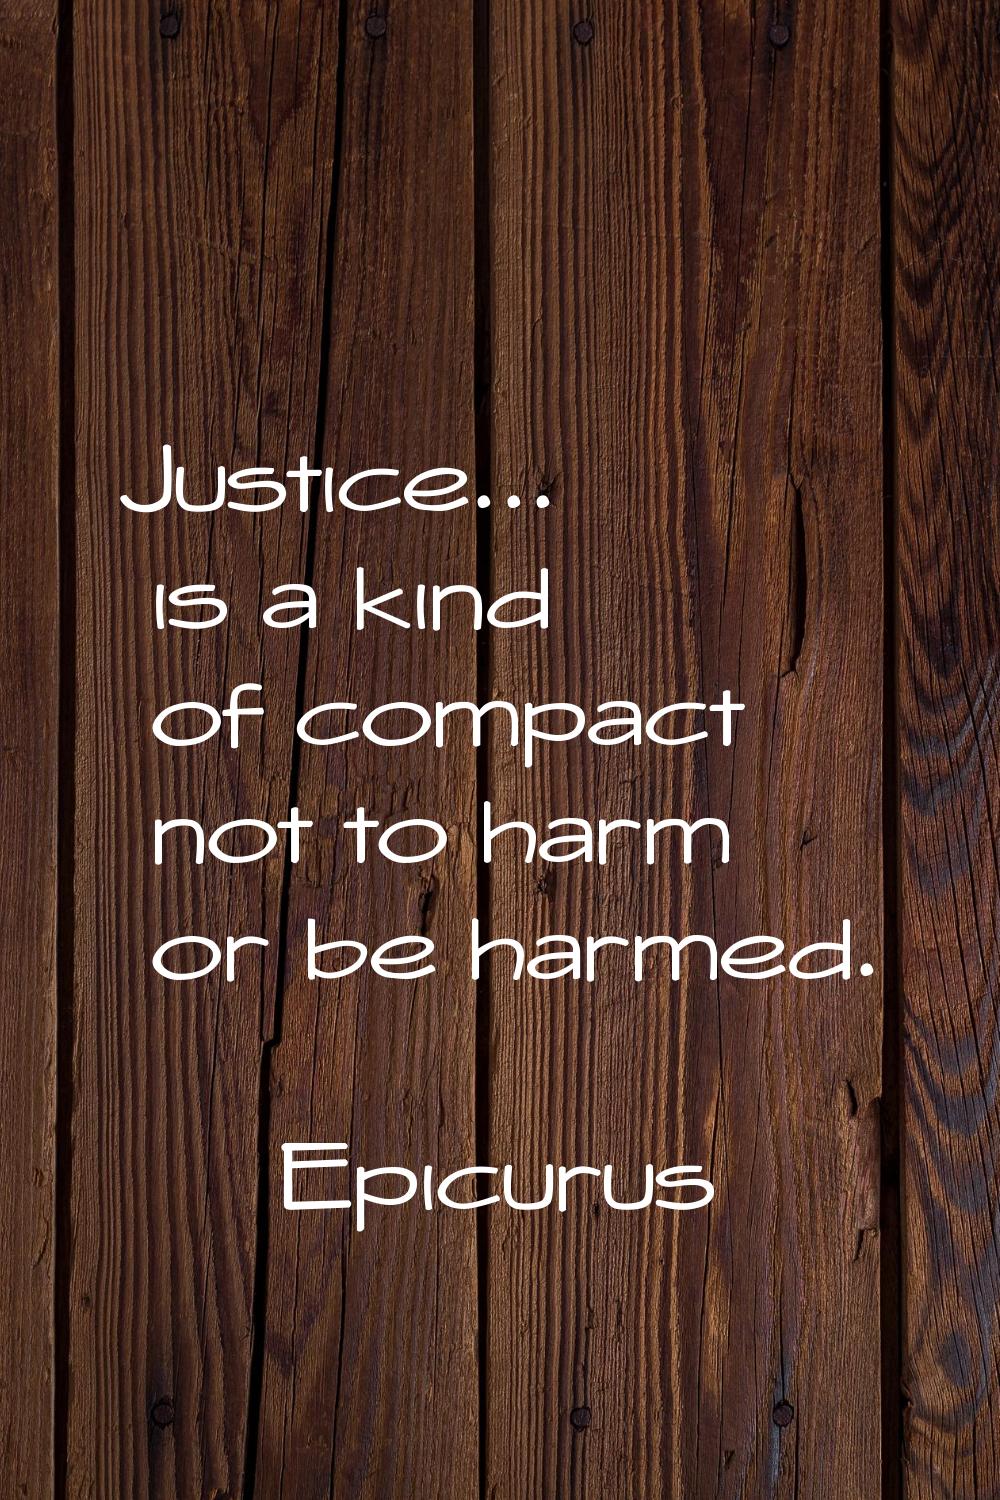 Justice... is a kind of compact not to harm or be harmed.